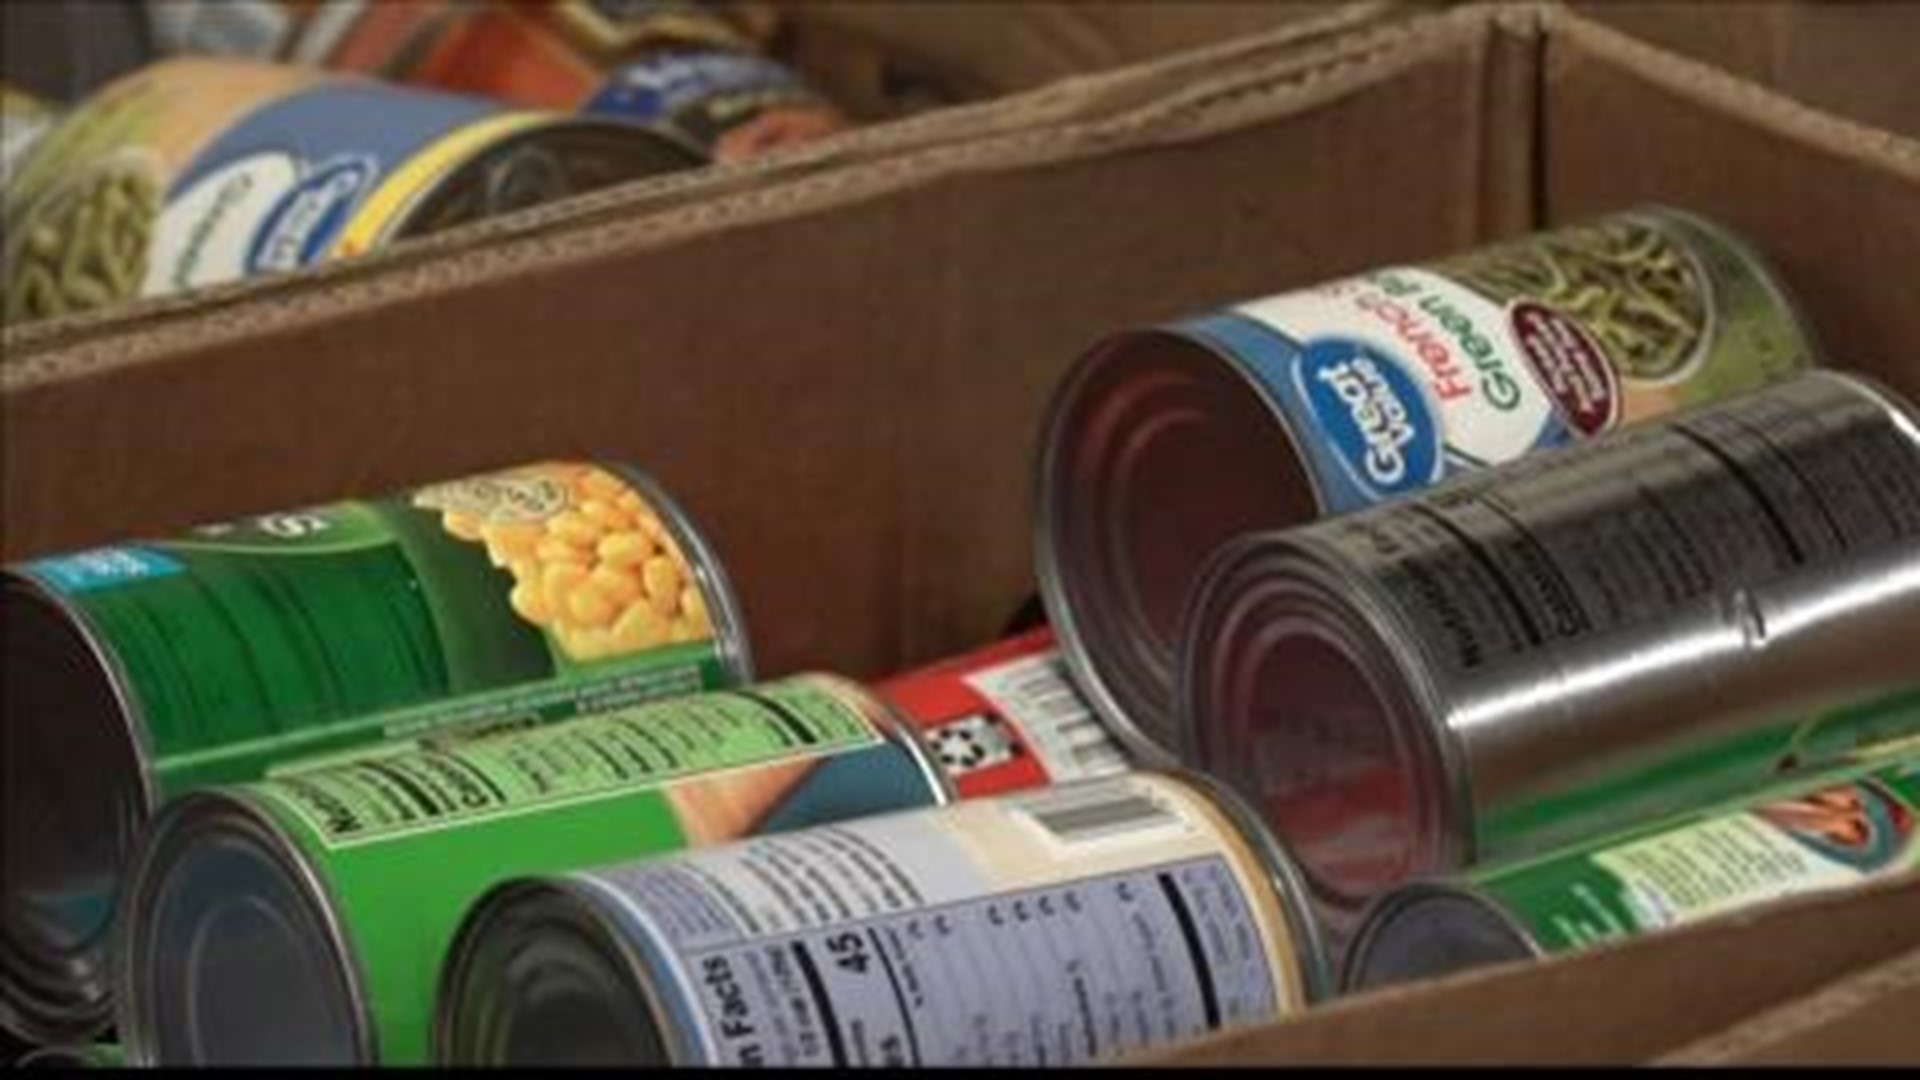 Want to help others or need food assistance for yourself or your family? Food Bank of North Alabama is here to help.